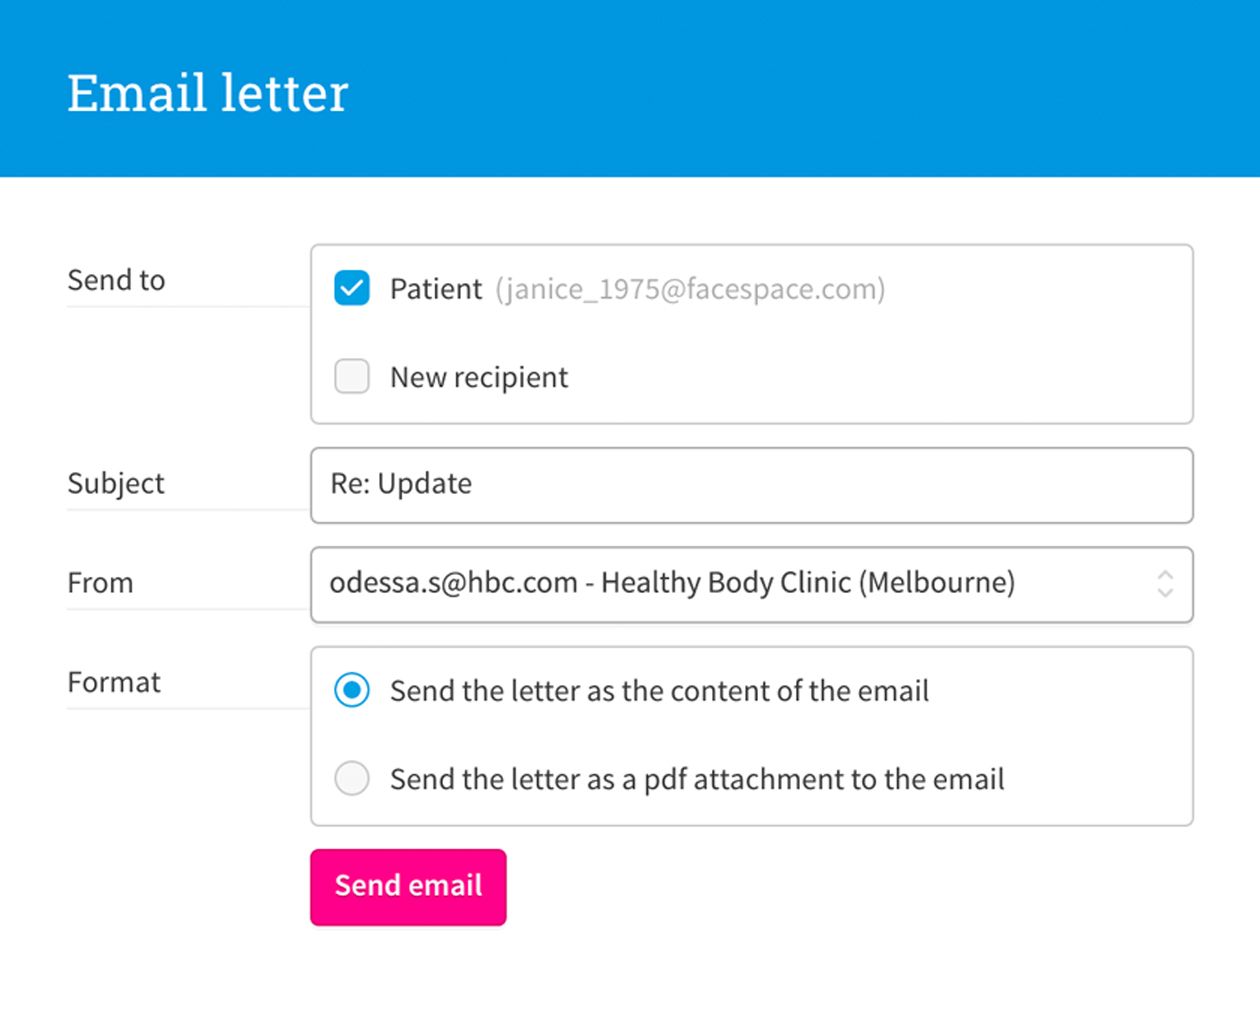 Email letter form with subject, recipient information and formatting options.